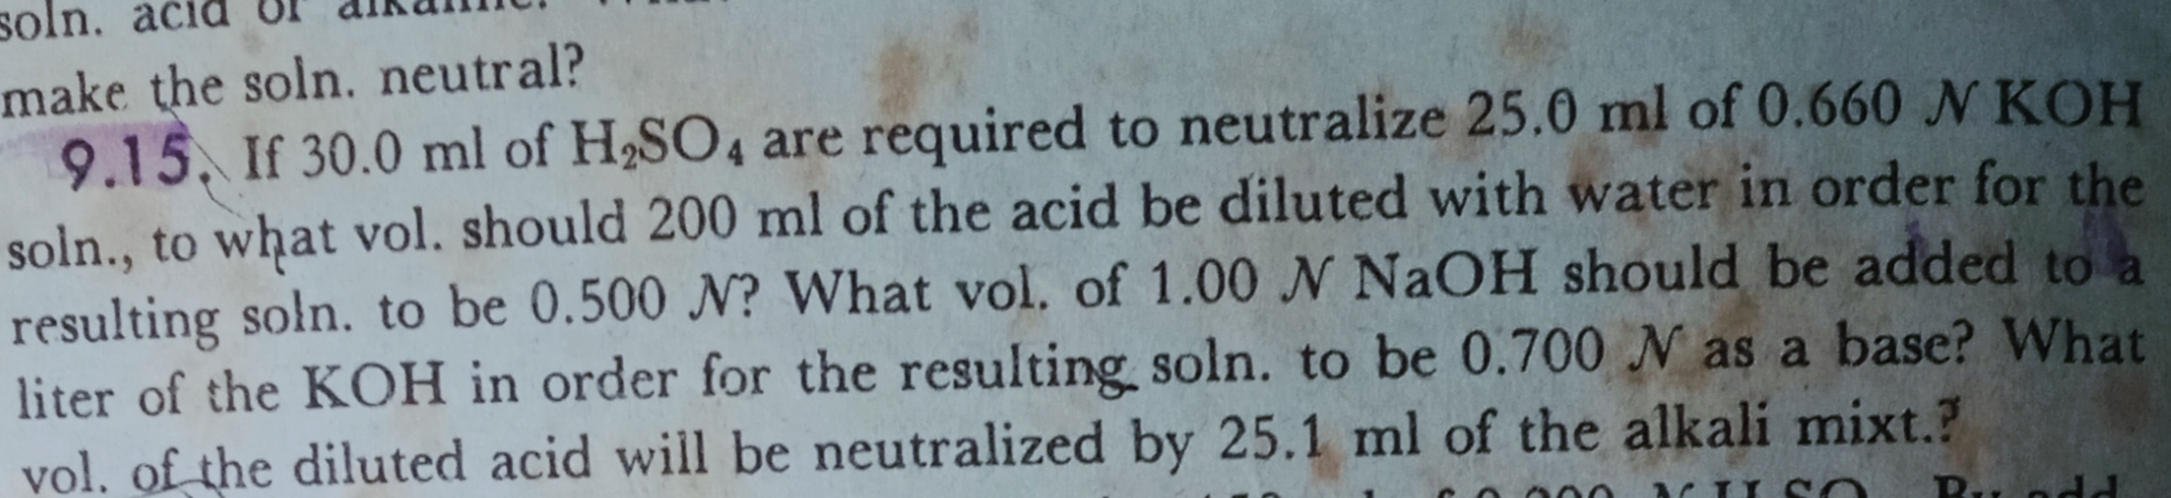 make
9.15. If 30.0 ml of H,SO, are required to neutralize 25.0 ml of 0.660 N KOH
soln., to what vol. should 200 ml of the acid be diluted with water in order for the
lting soln to he 0,500 N? What vol. of 1.00 N NaOH should be added to a
